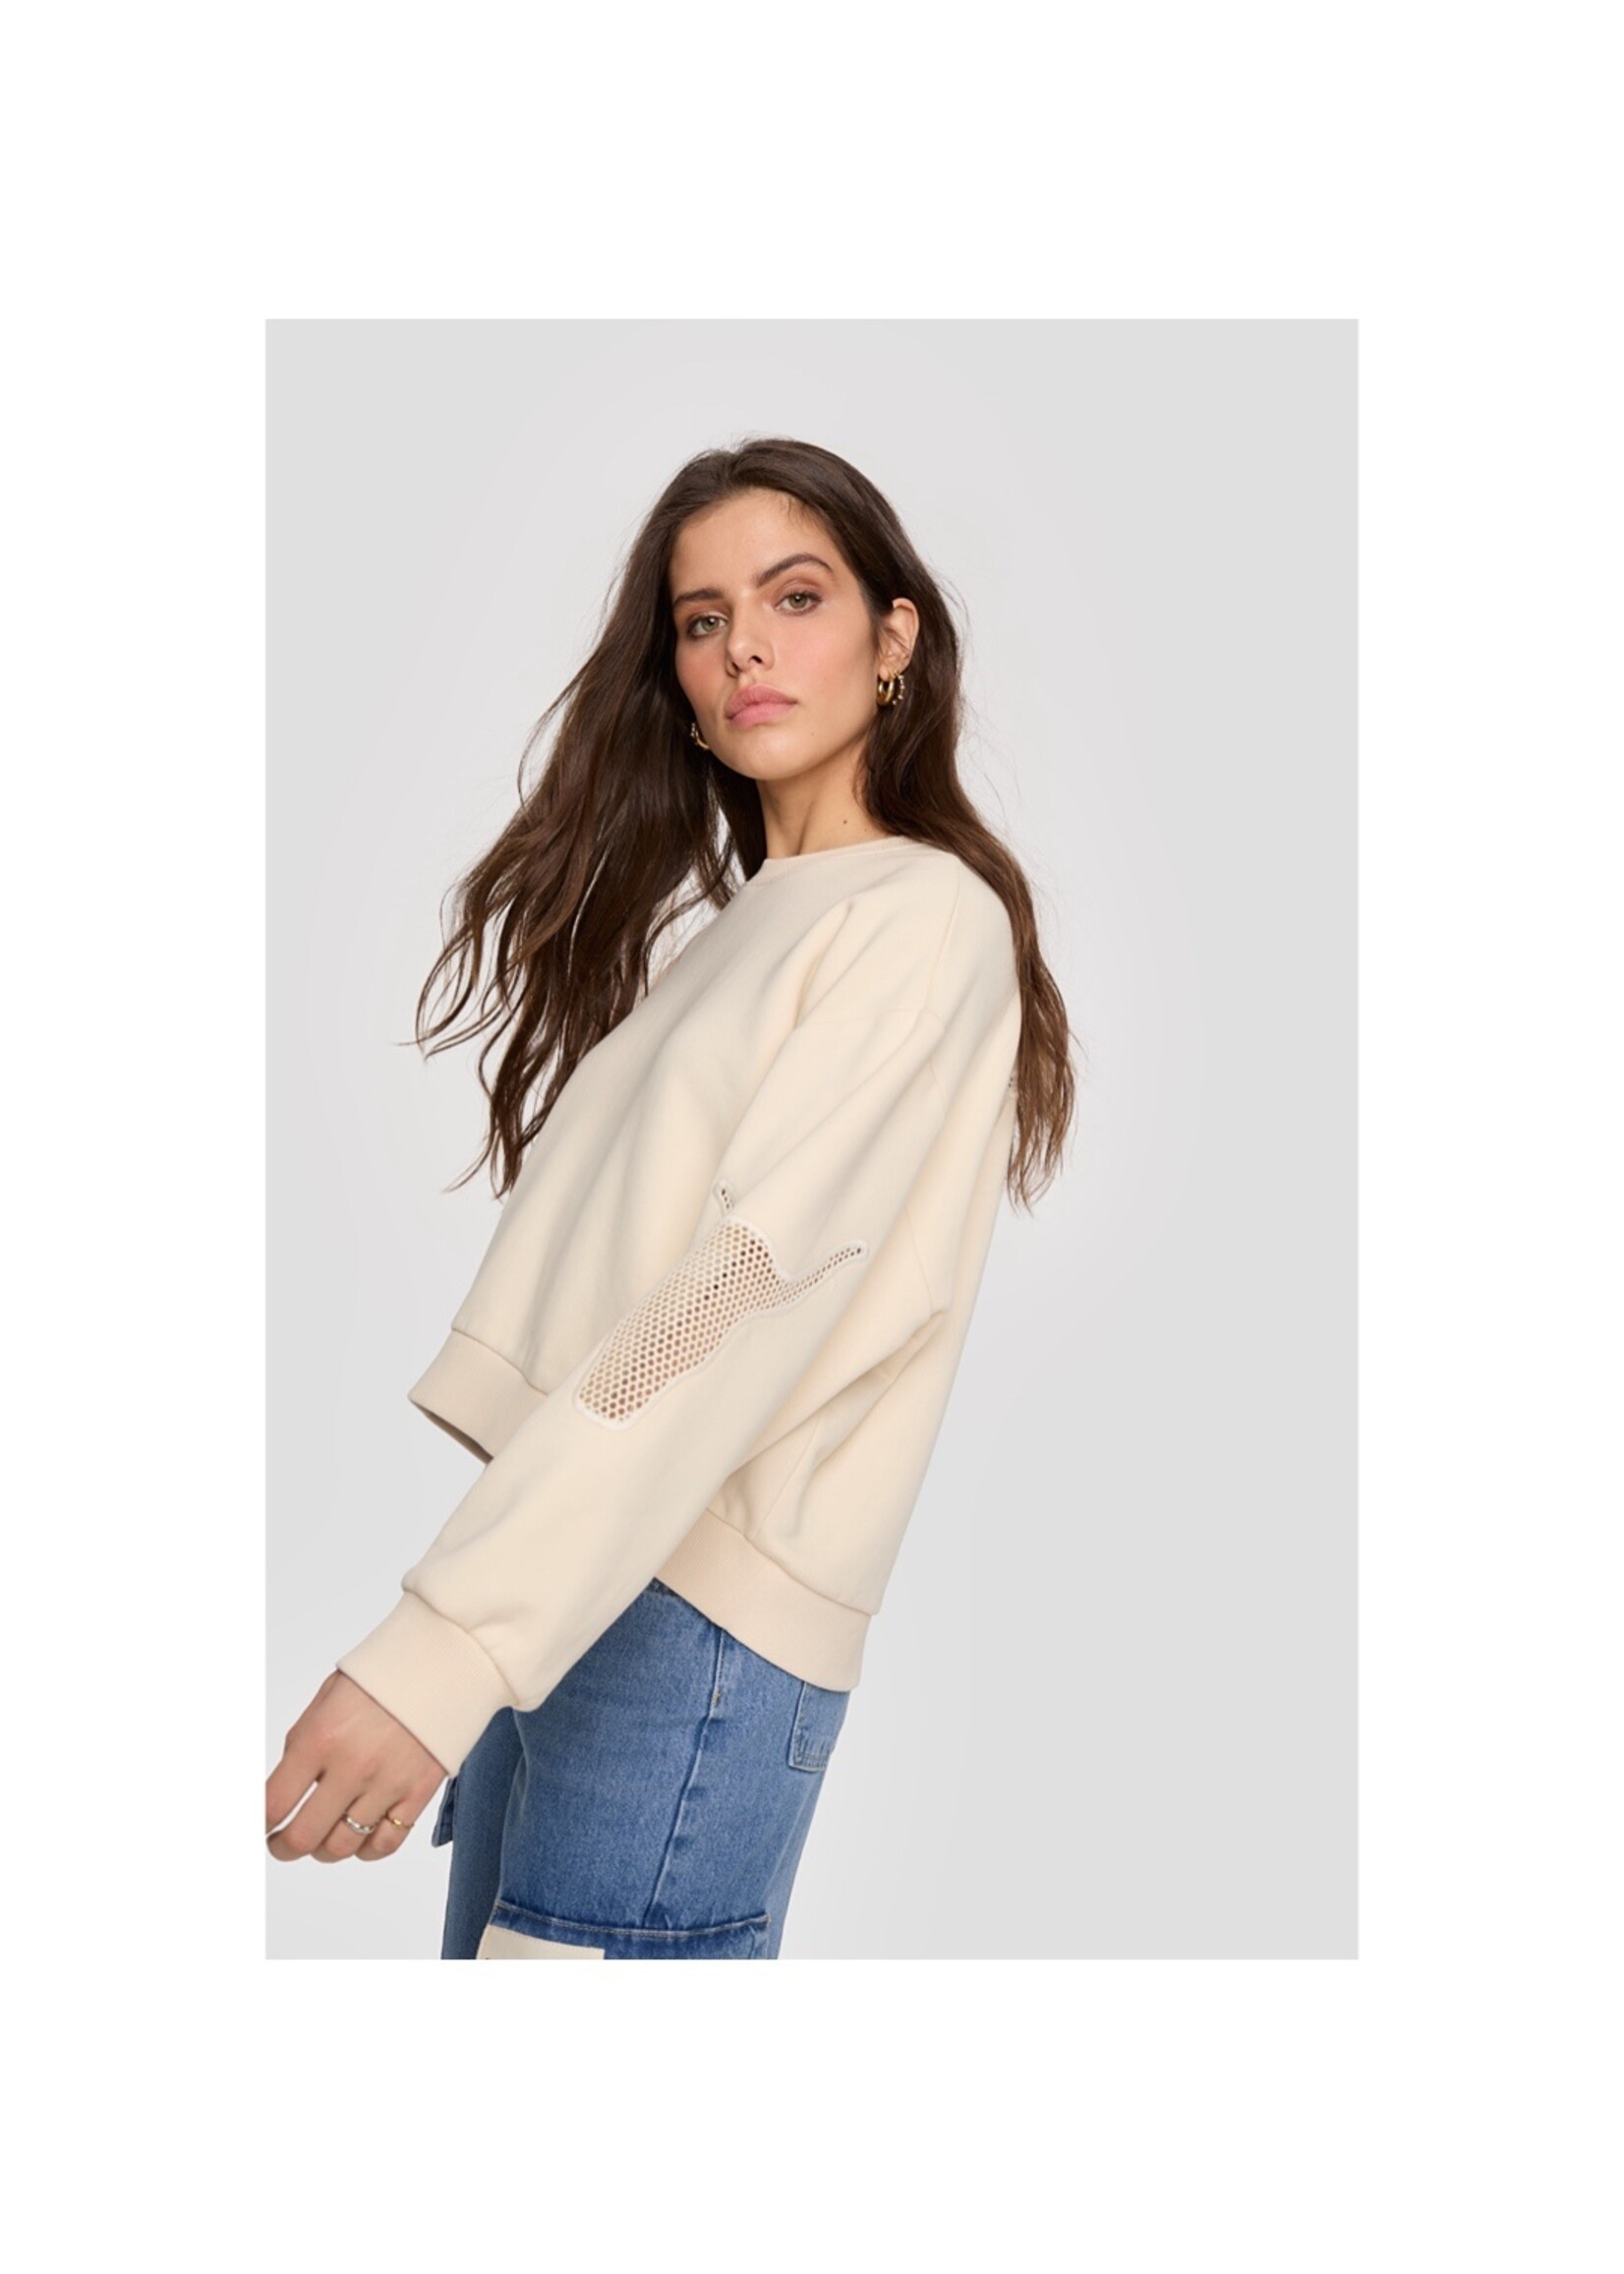 Alix The Label Knitted Mesh Sweater